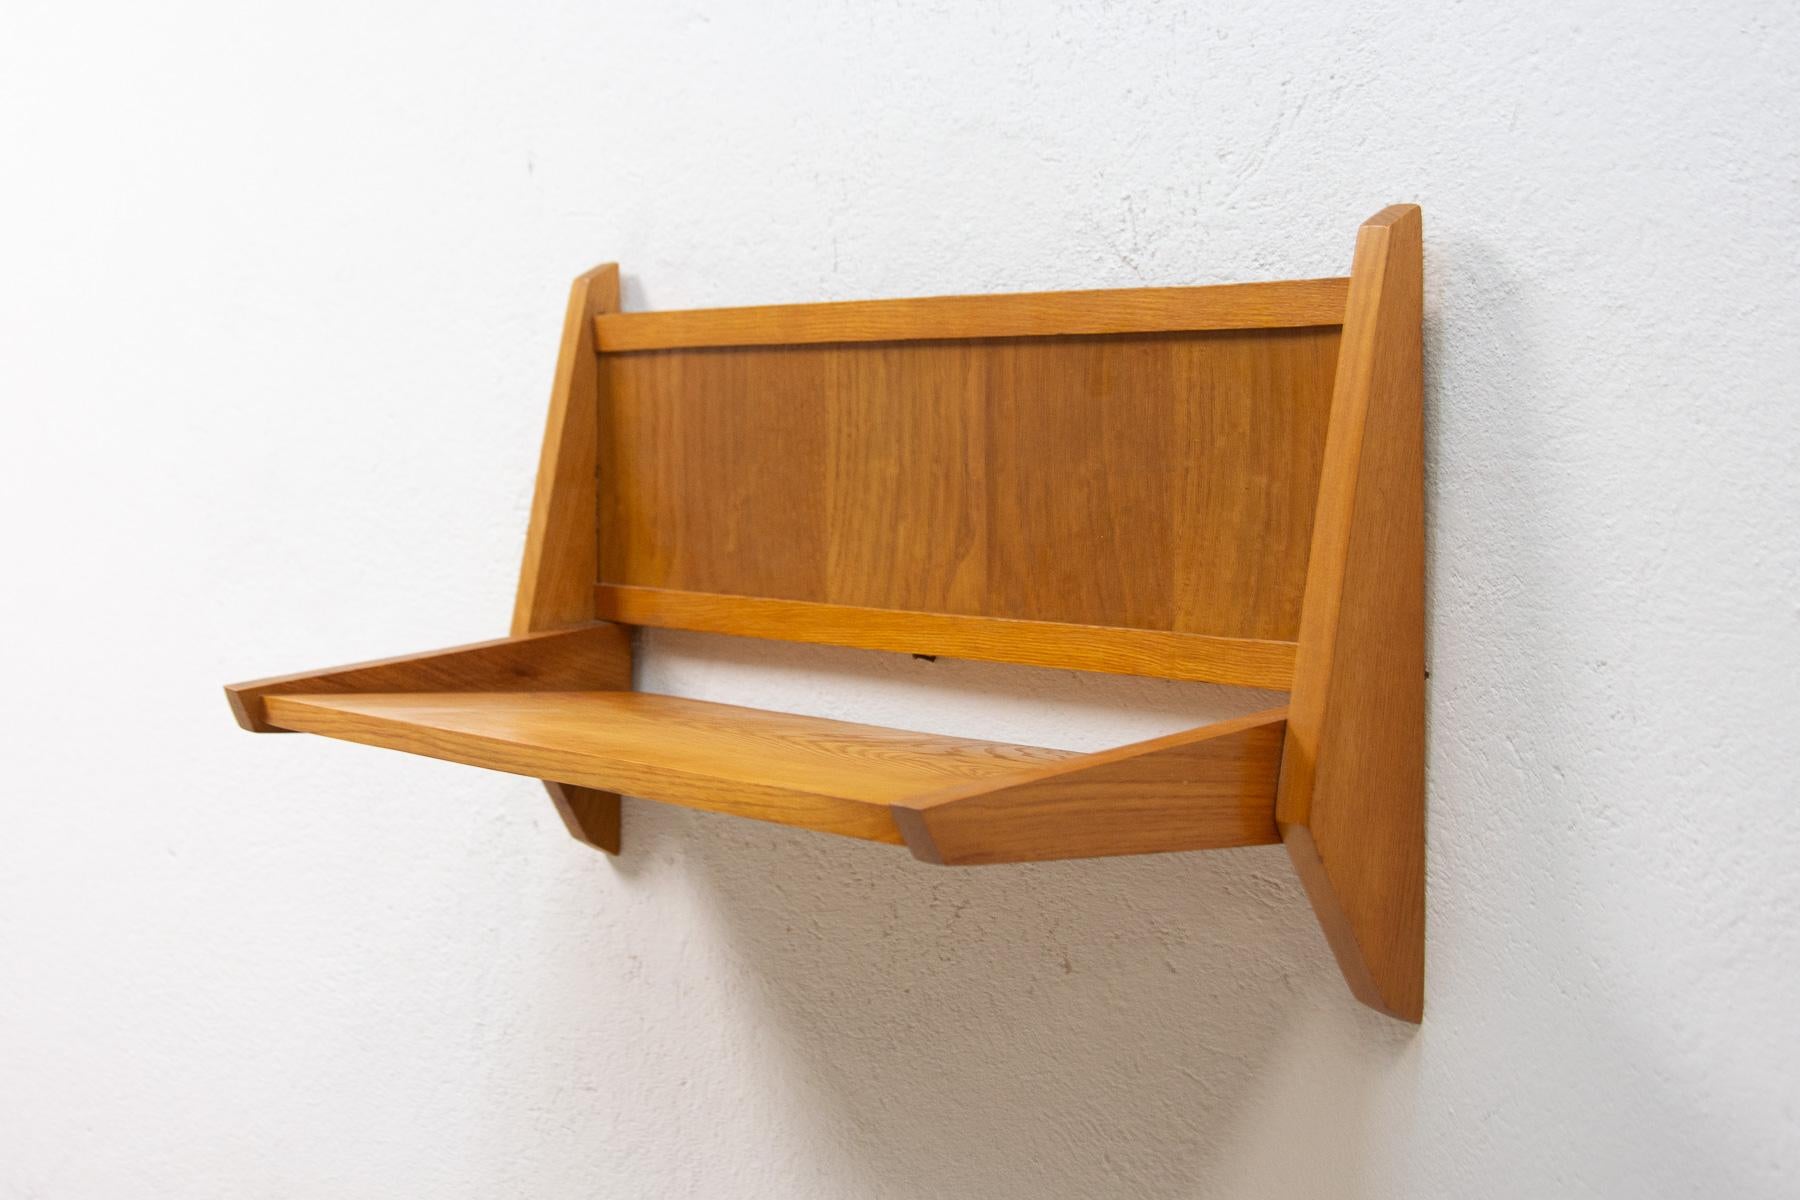 Mid-century wooden shelf made by ULUV company in the former Czechoslovakia in the 1960's.
It's made of beech wood.
In very good Vintage condition.

 

Height: 30 cm

width: 54 cm

depth: 22 cm